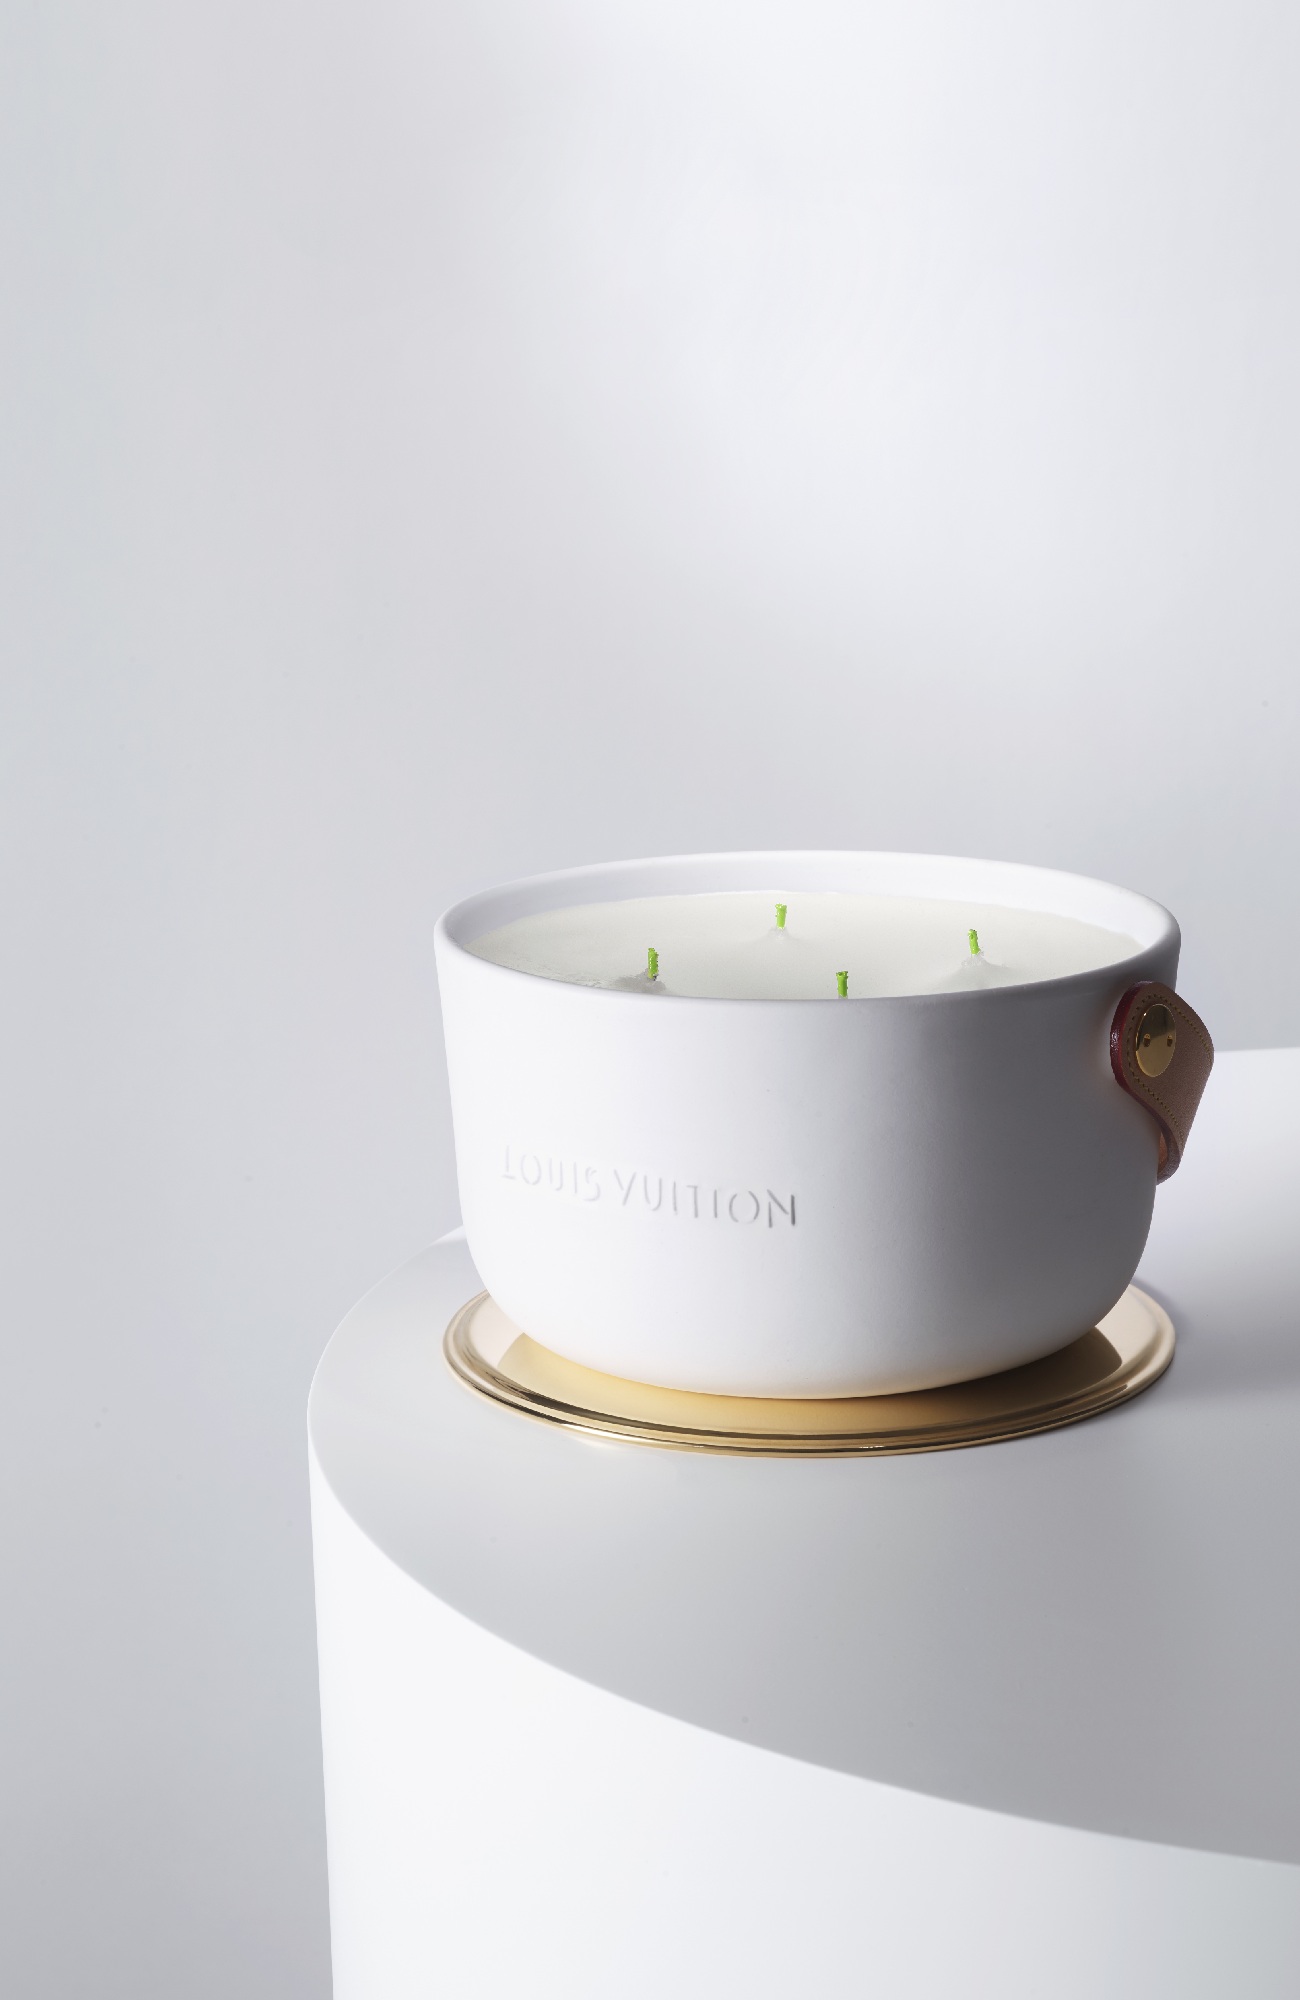 Louis Vuitton creates scented candles for your travels - Duty Free Hunter